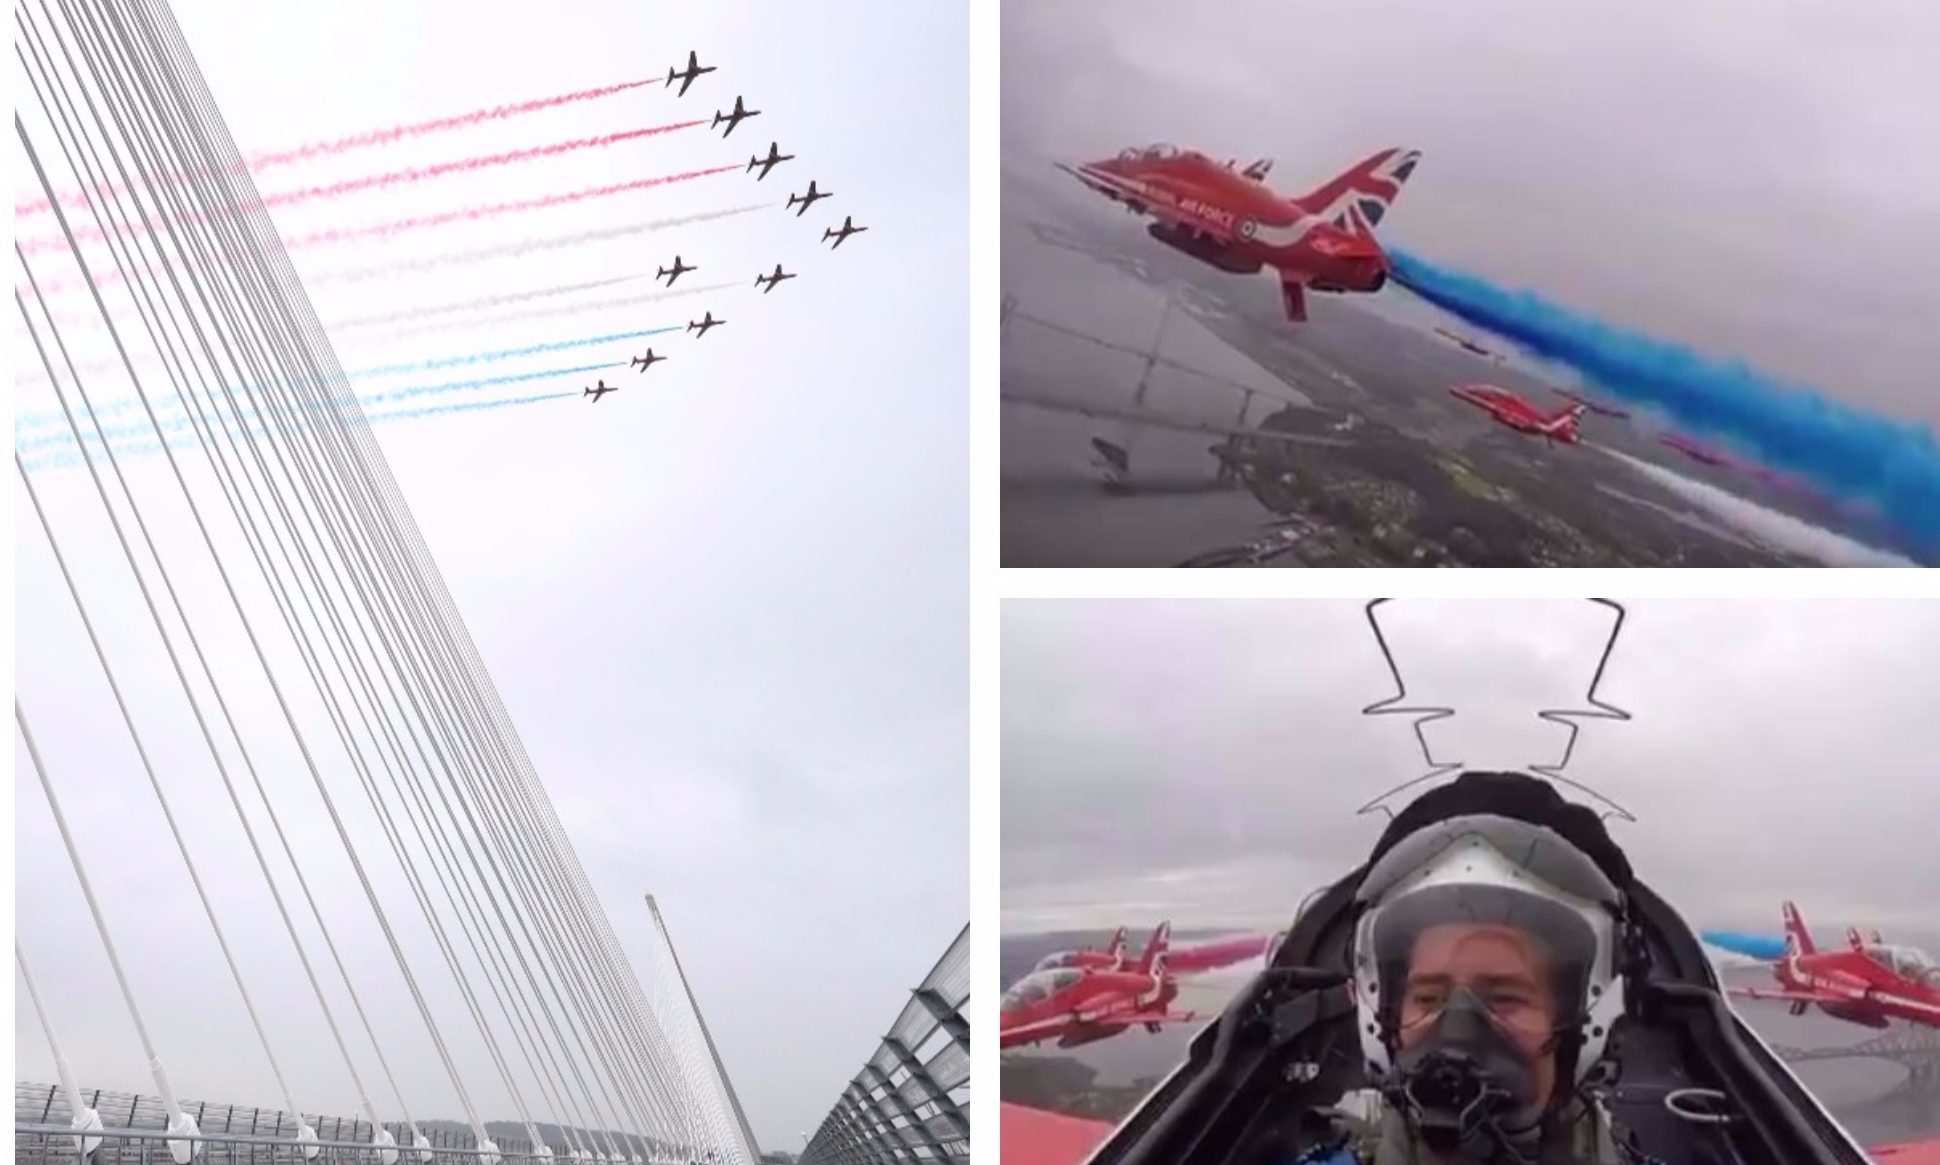 Footage shows the Red Arrows' view of today's Queensferry Crossing opening ceremony.